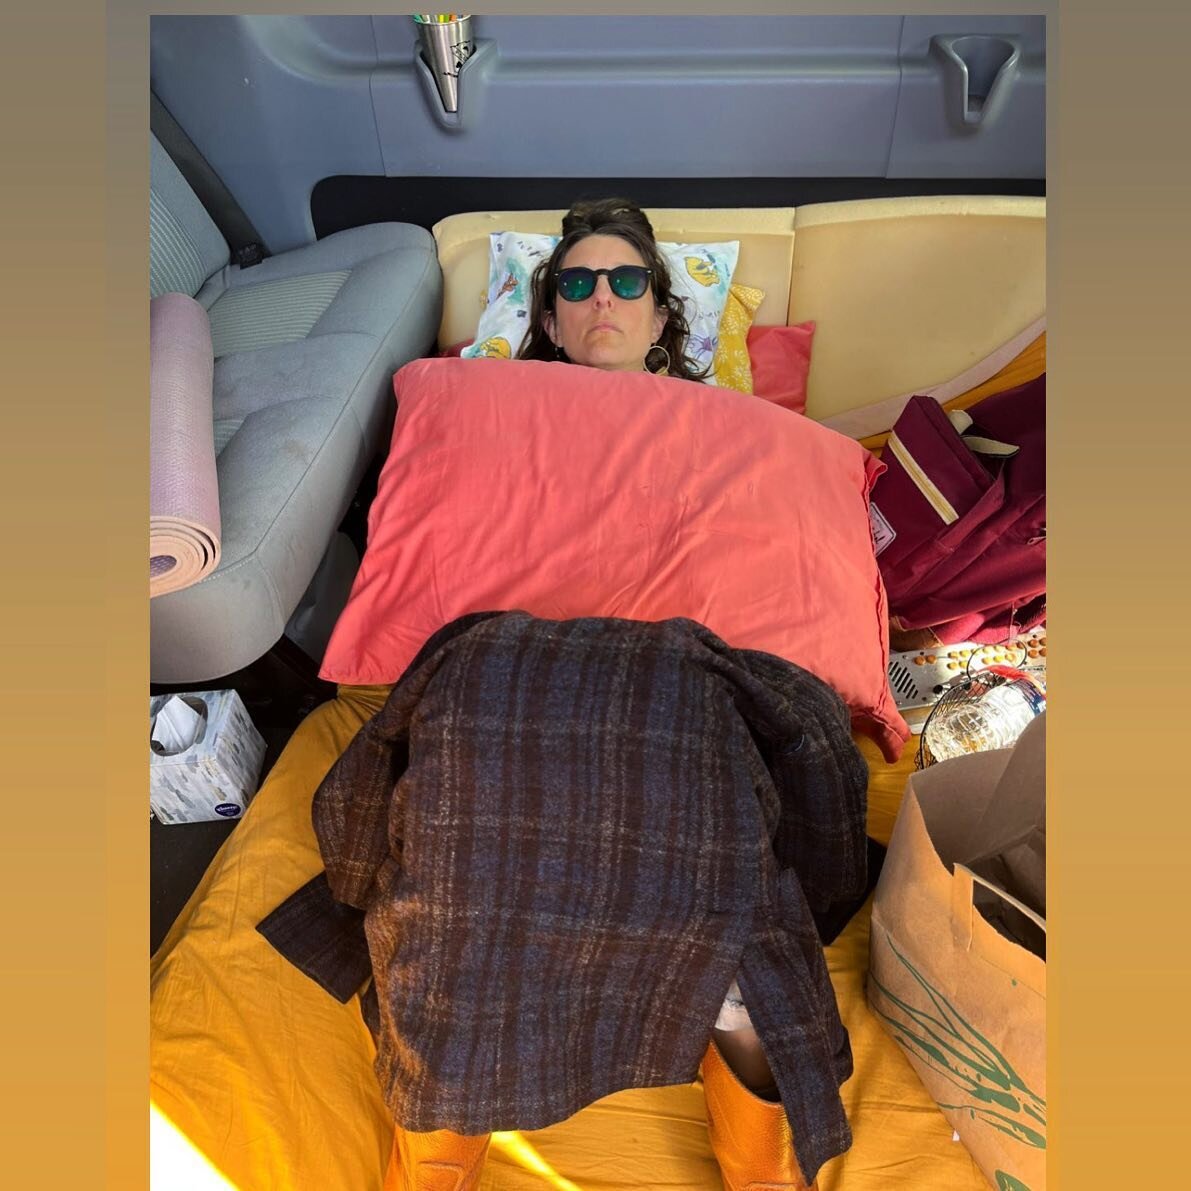 I love this picture so much. I feel like it encapsulates so much of my touring career&mdash; trying to bring some color into the gray van, catching a bit of rest before or after sound check, figuring out ways to bring coziness to a not-inherently-coz